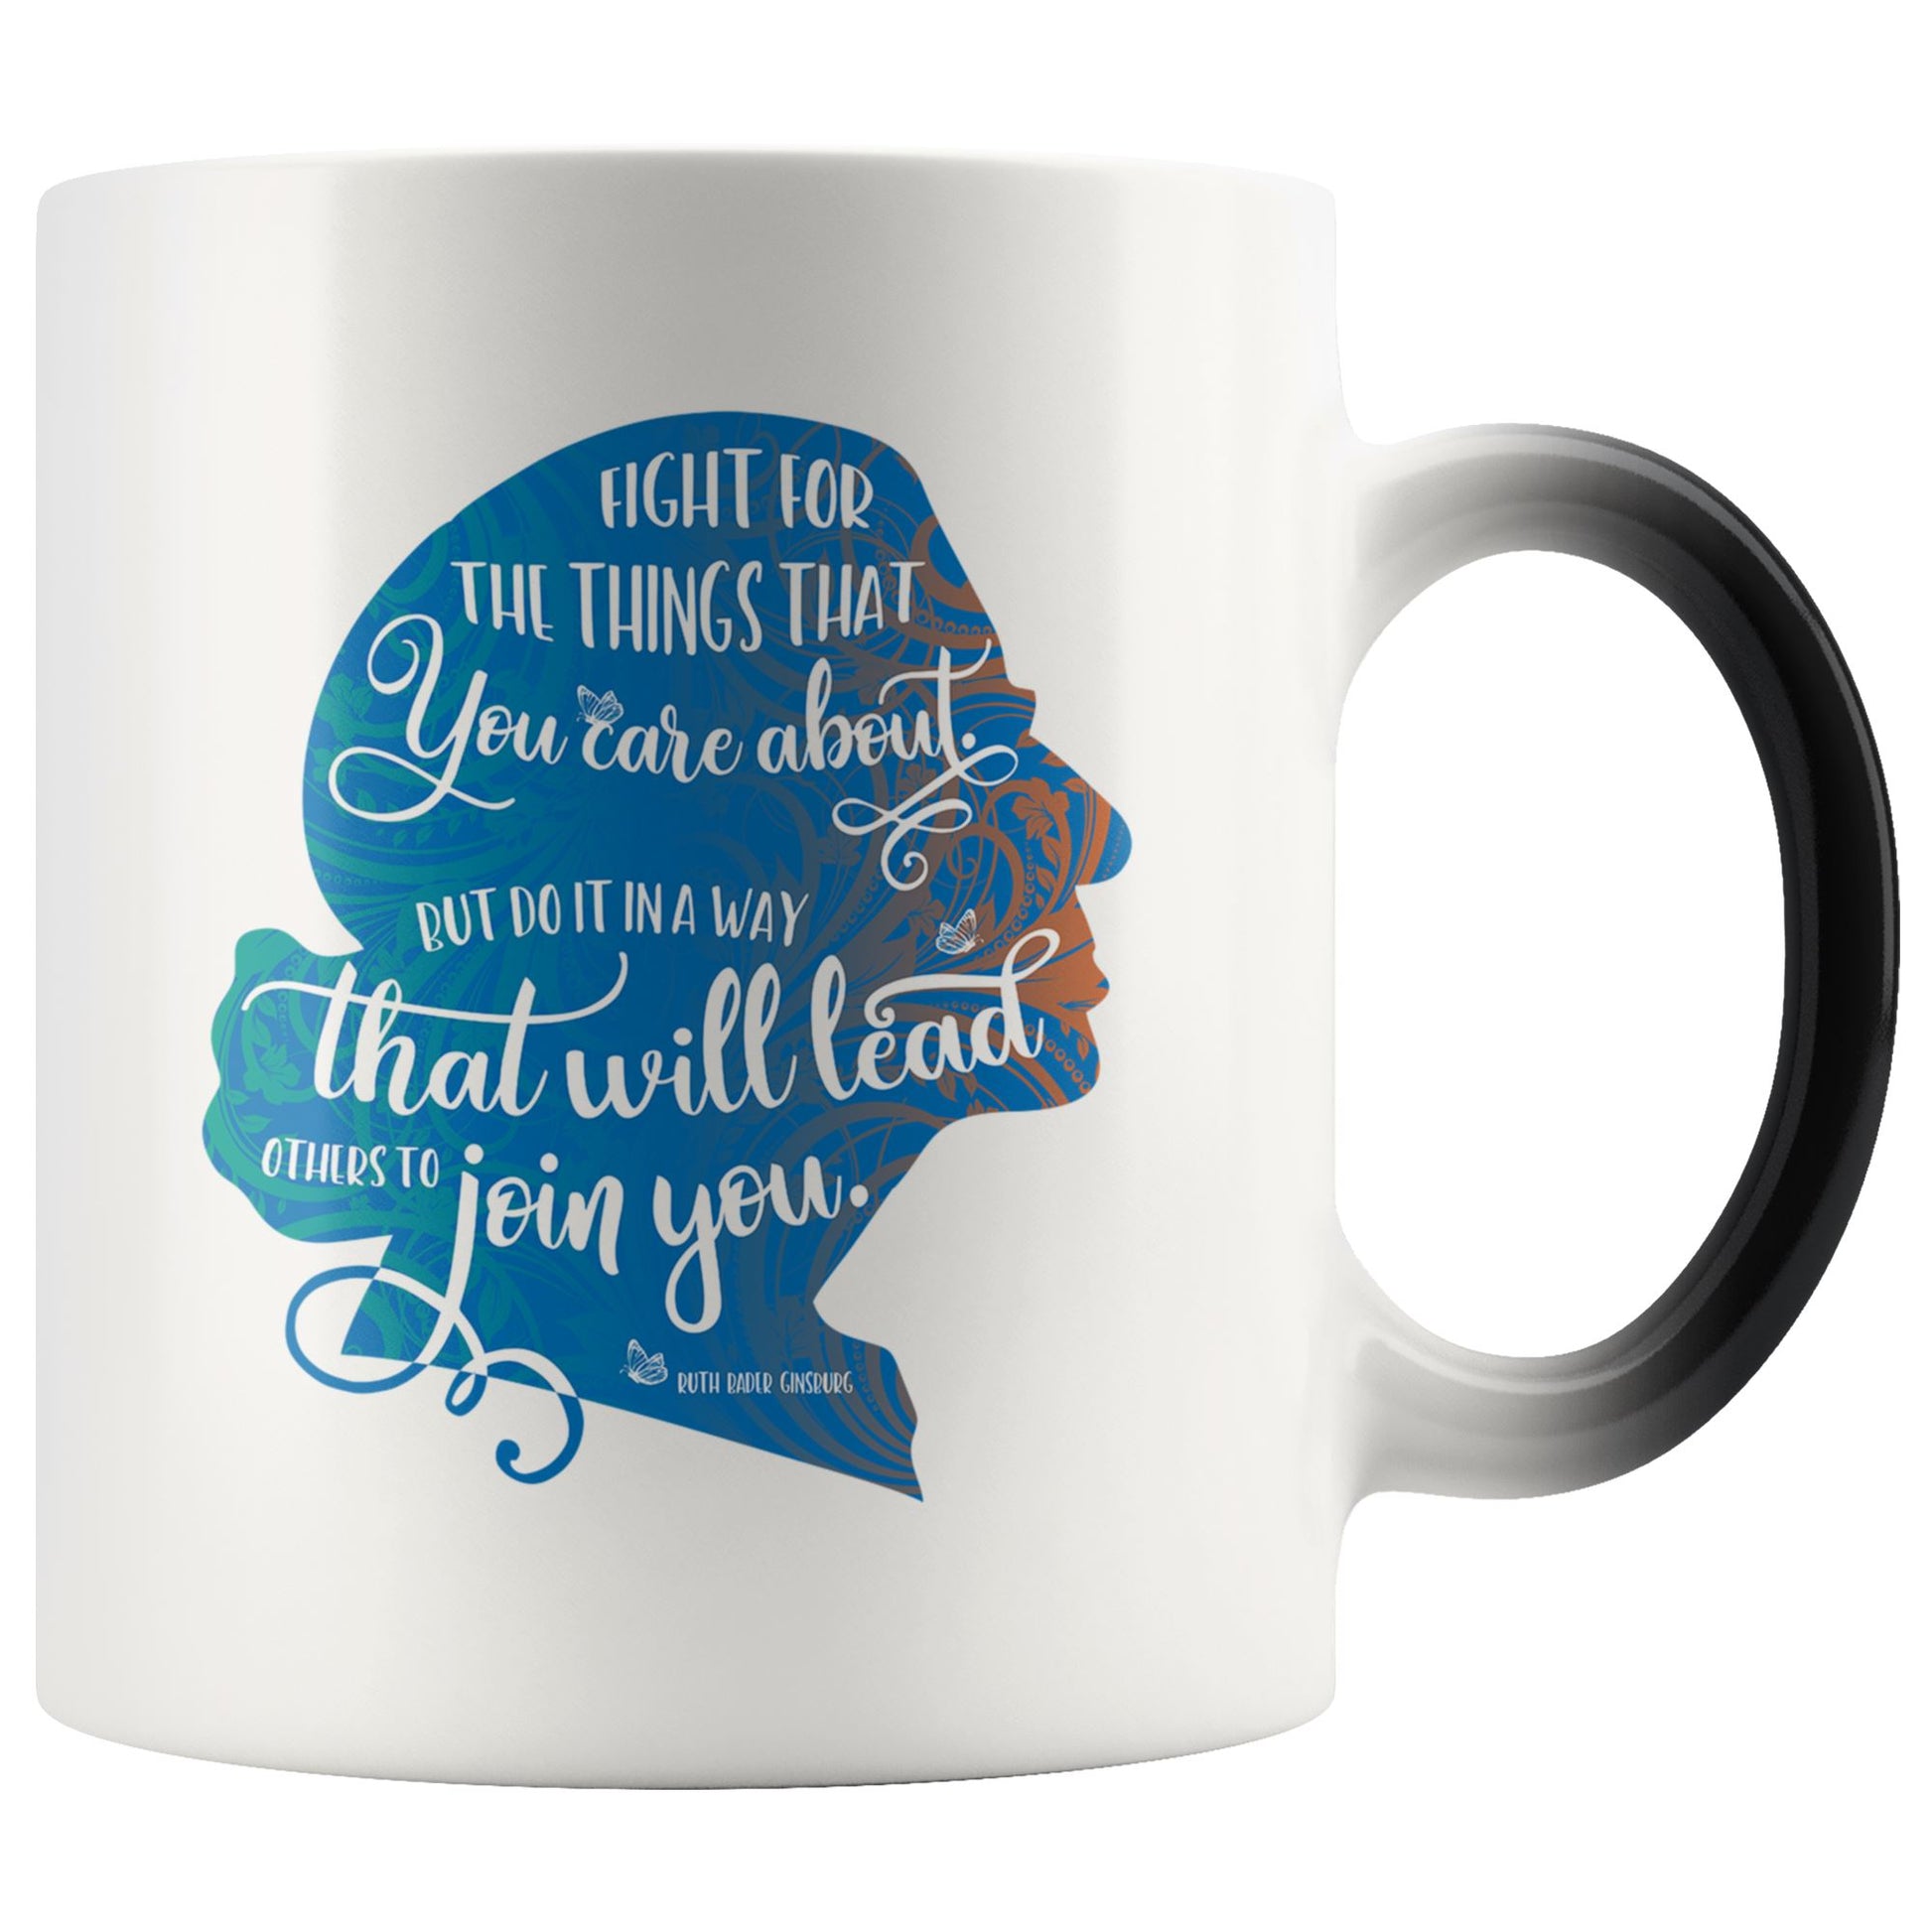 RBG Mug • Fight for the Things You Care About Color Changing Coffe Mug 110oz. Drinkware teelaunch Blue Silo 